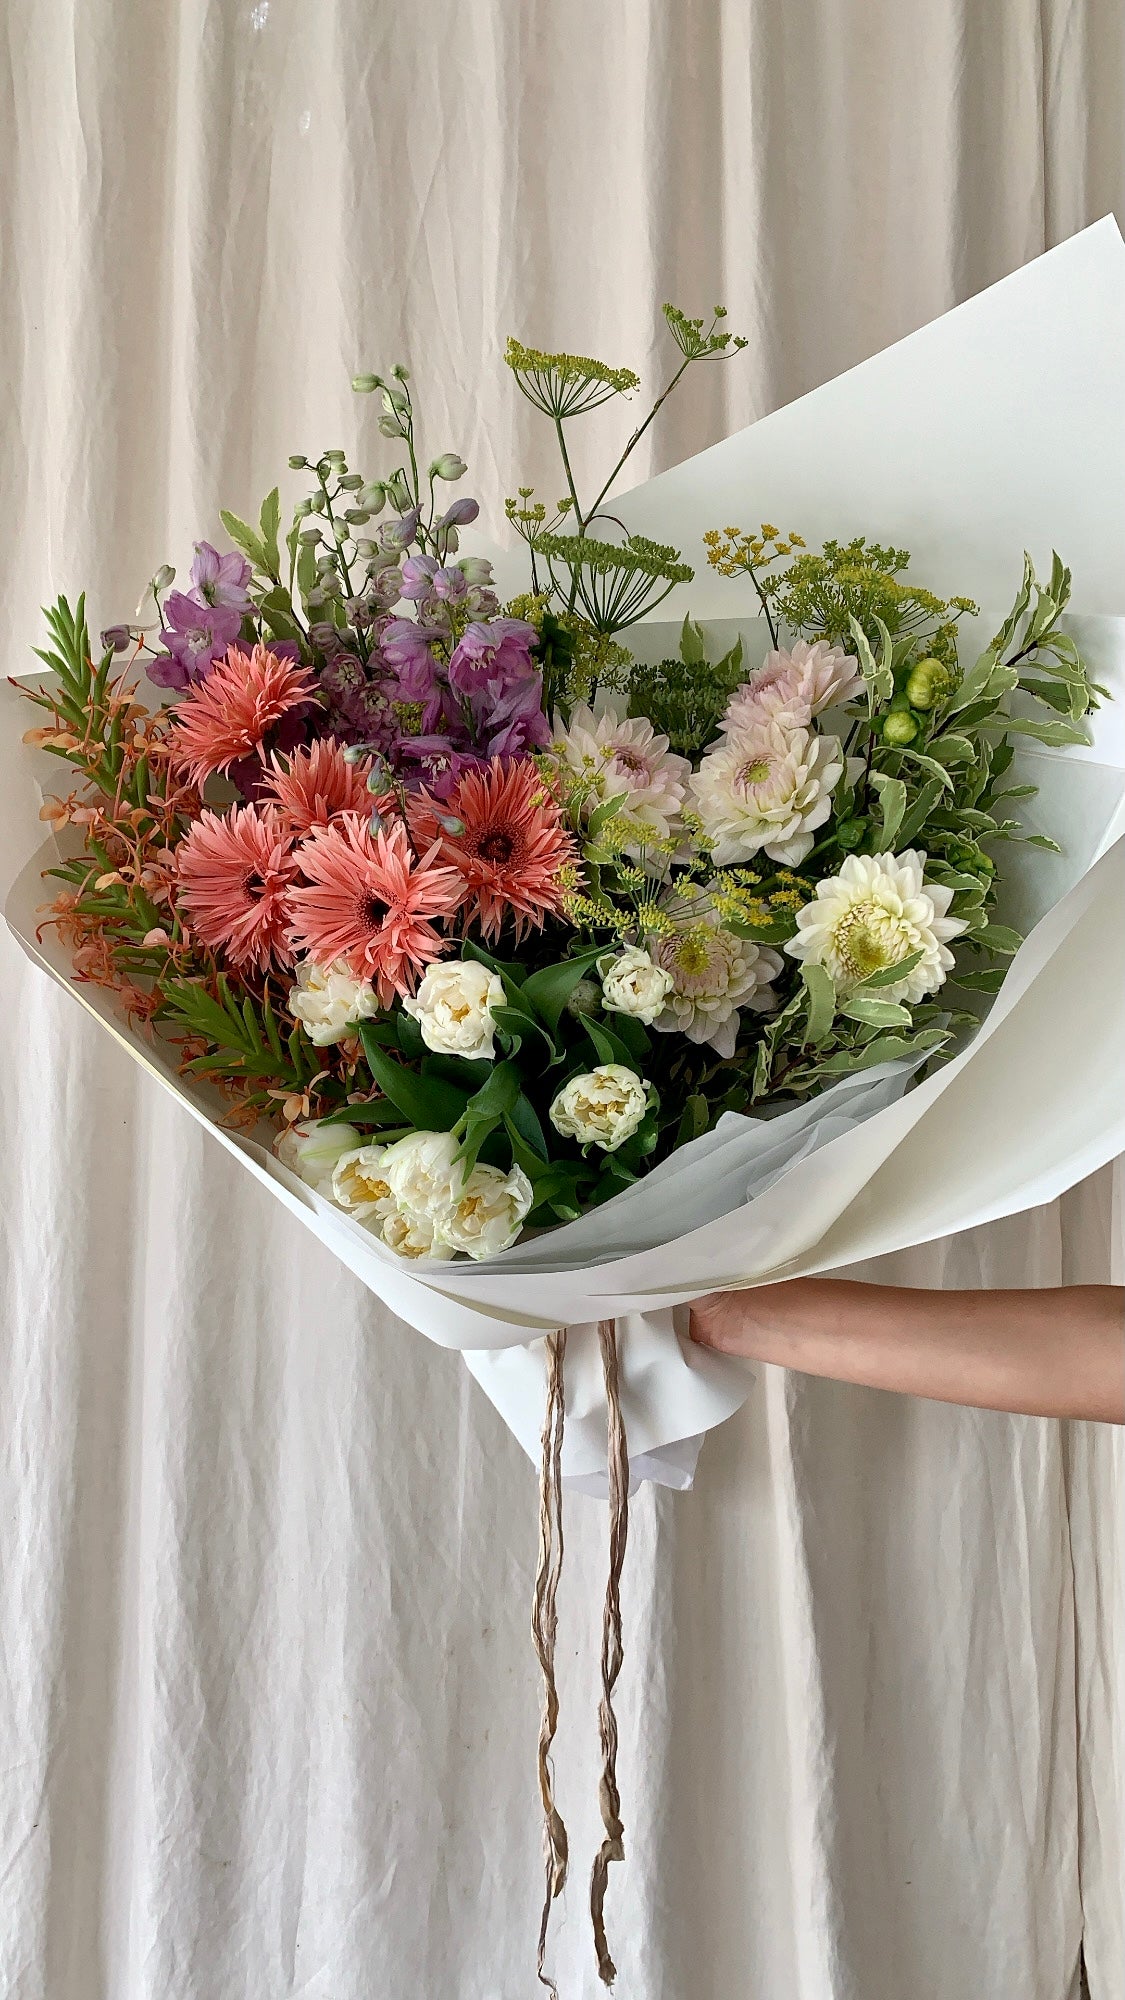 Unique floral arrangement with an unusual mix of flowers and foliage.